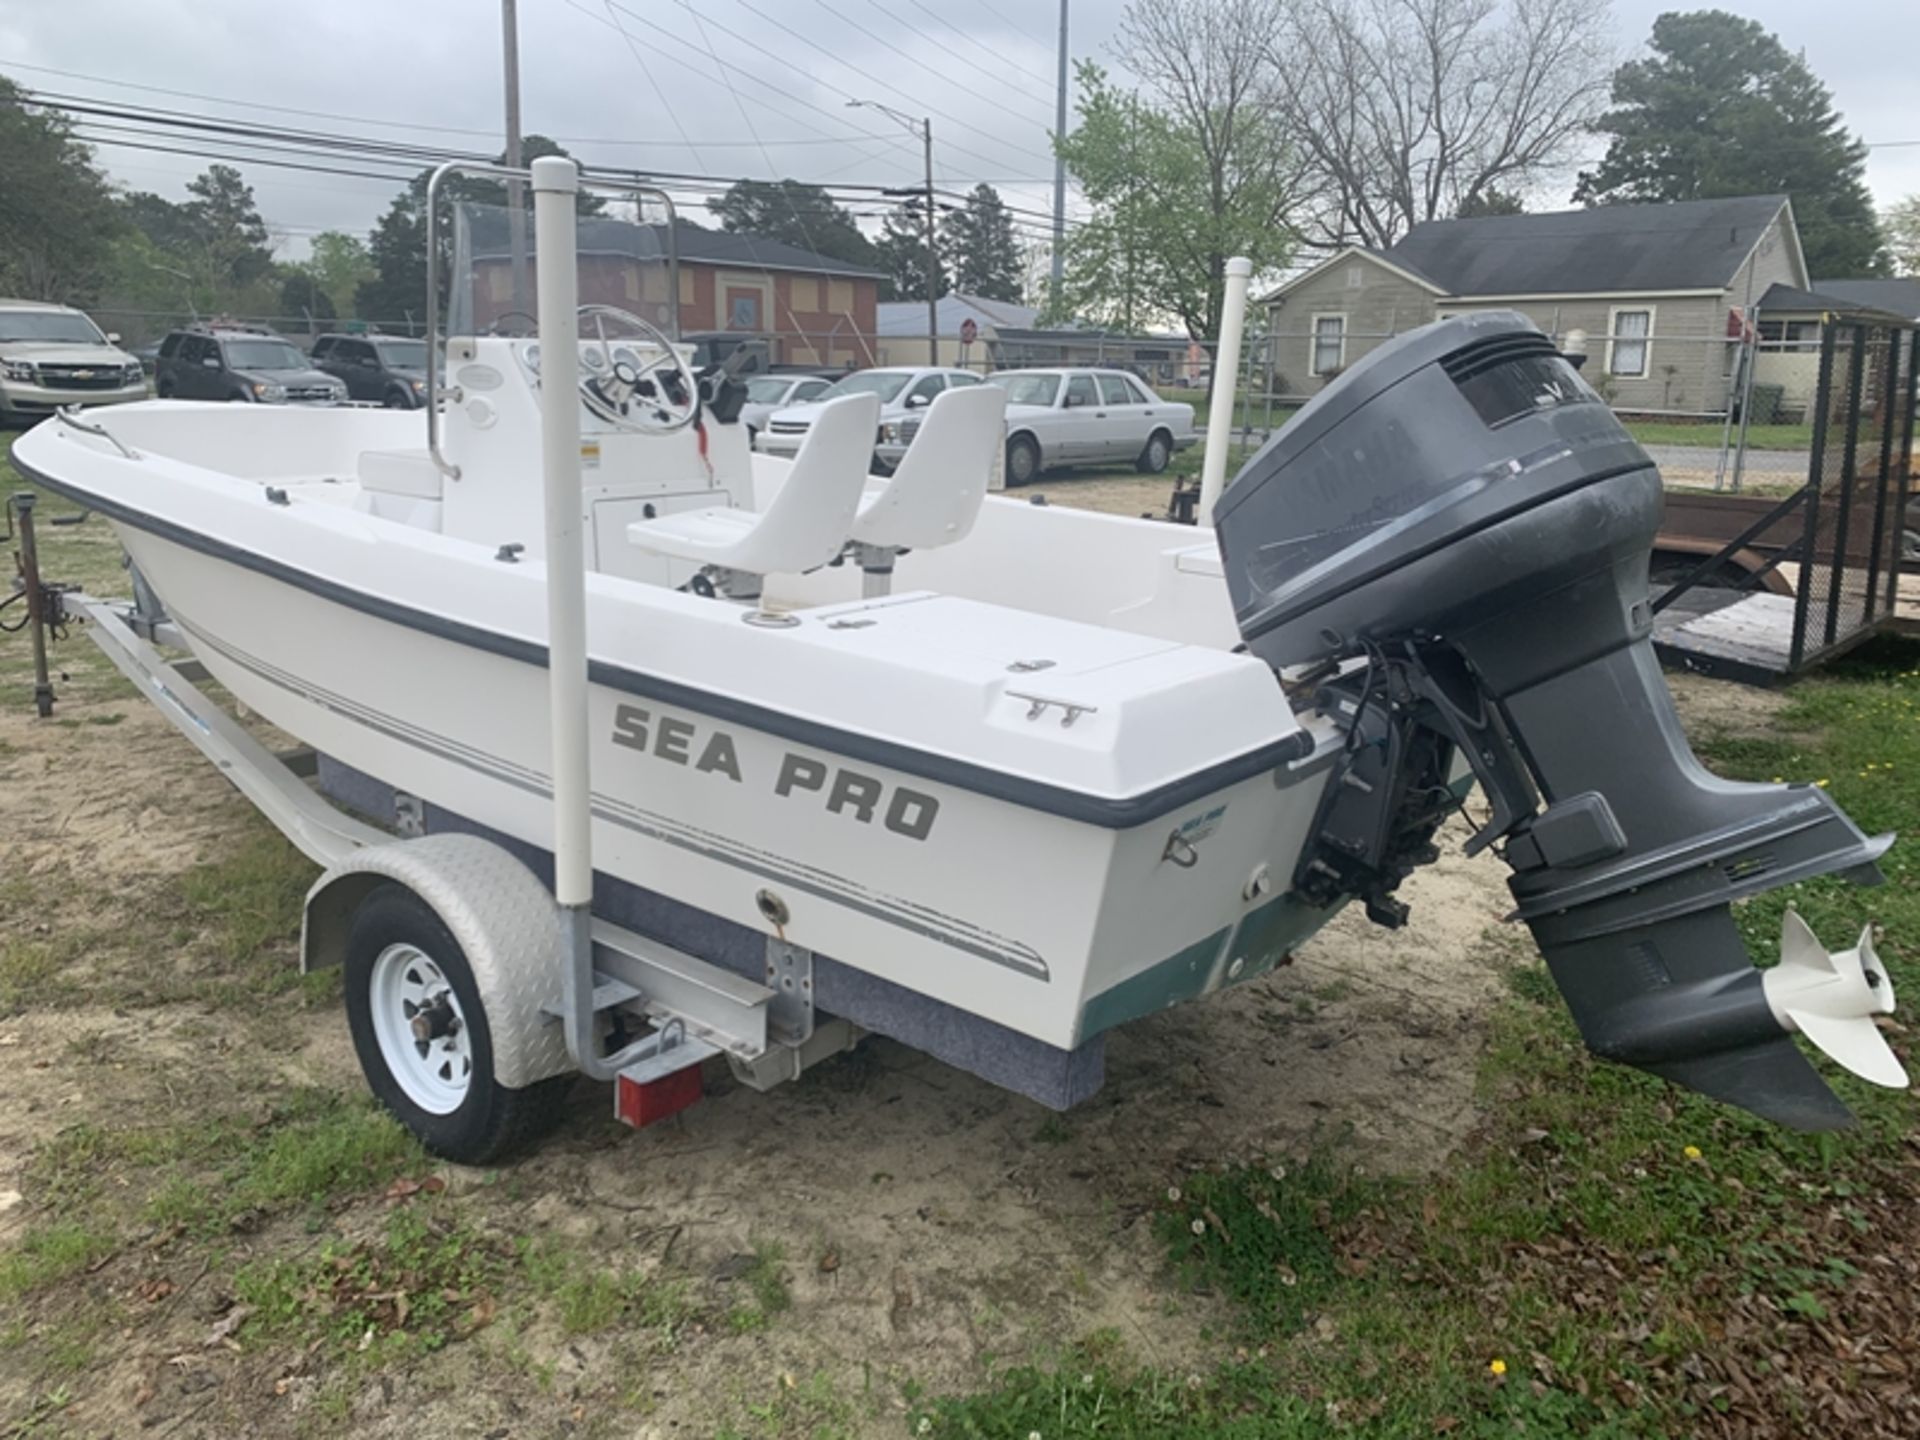 2003 SEA PRO 170 17' fiberglass center console with Yamaha 115 and trailer - HULL ID - PIOLB978K203 - Image 4 of 9